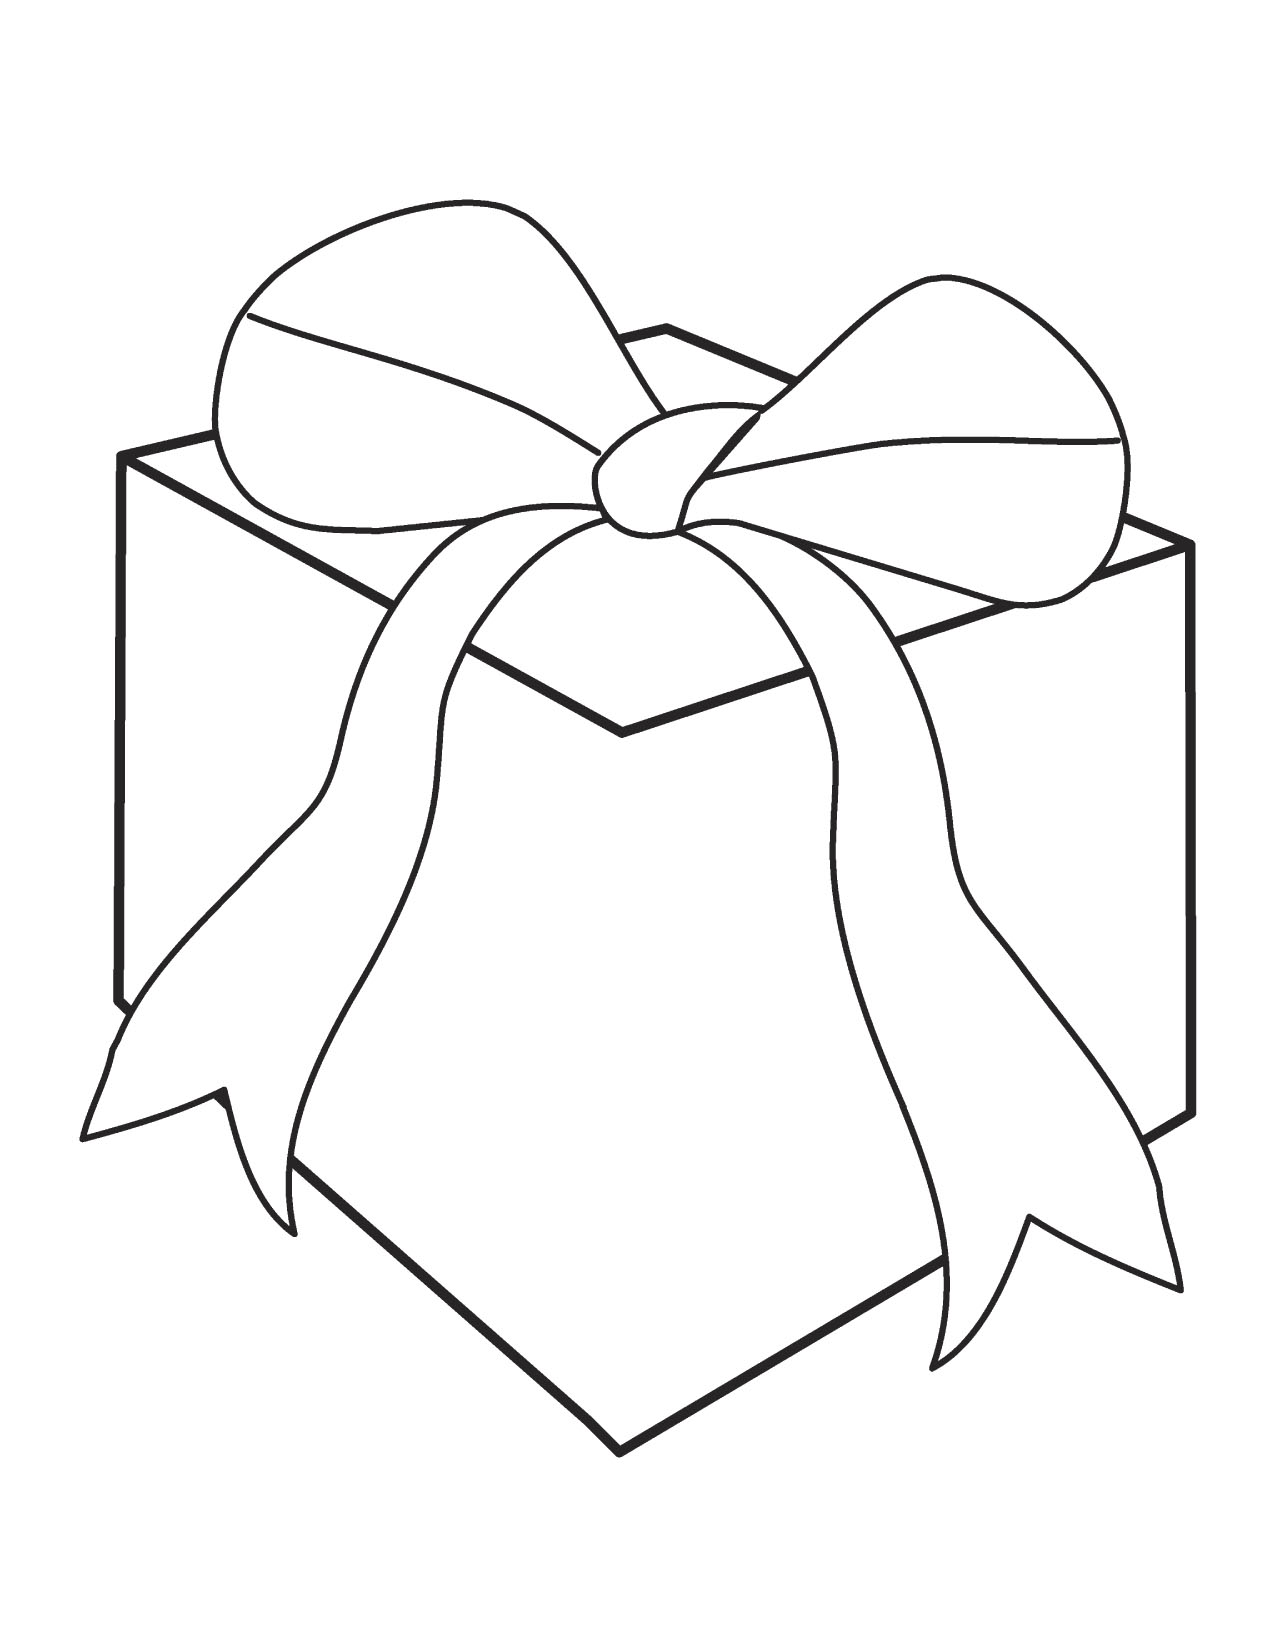 Free Gifts Clipart Black And White, Download Free Clip Art.